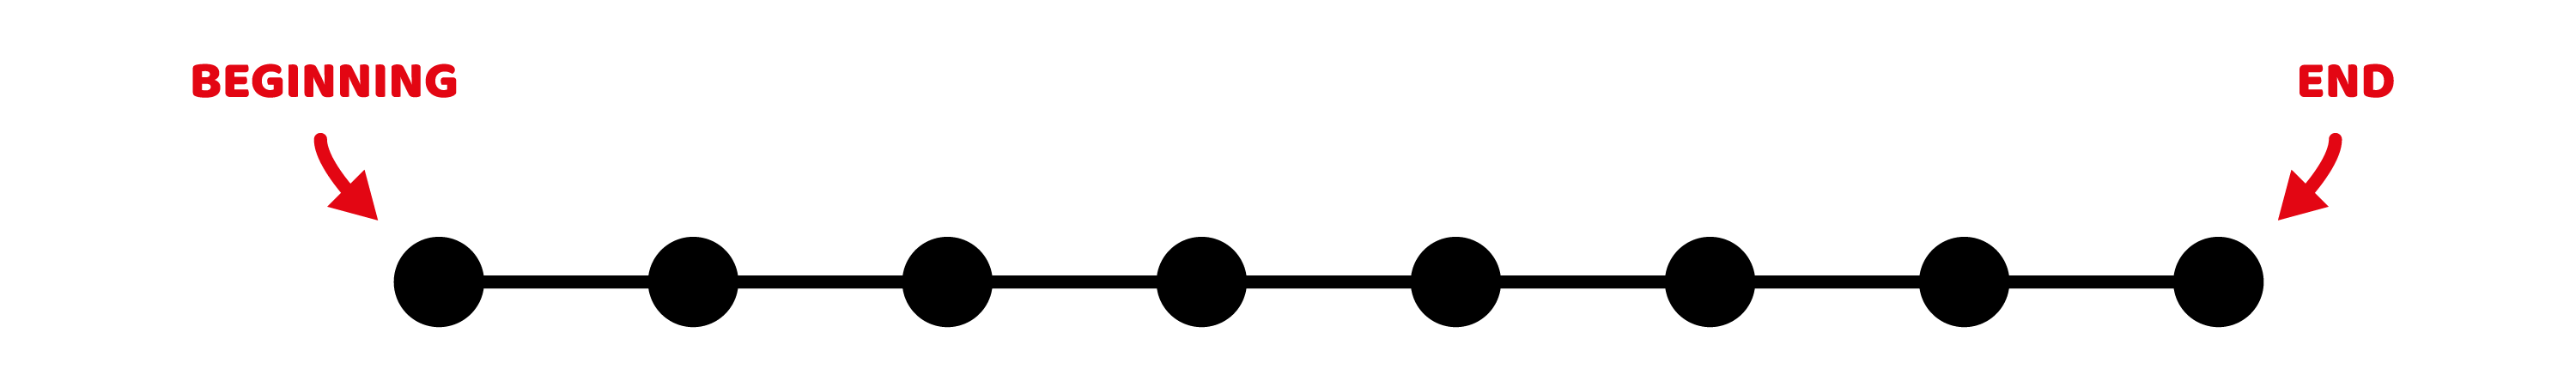 8 black equidistant dots on a line, with arrows indicating beginning and end